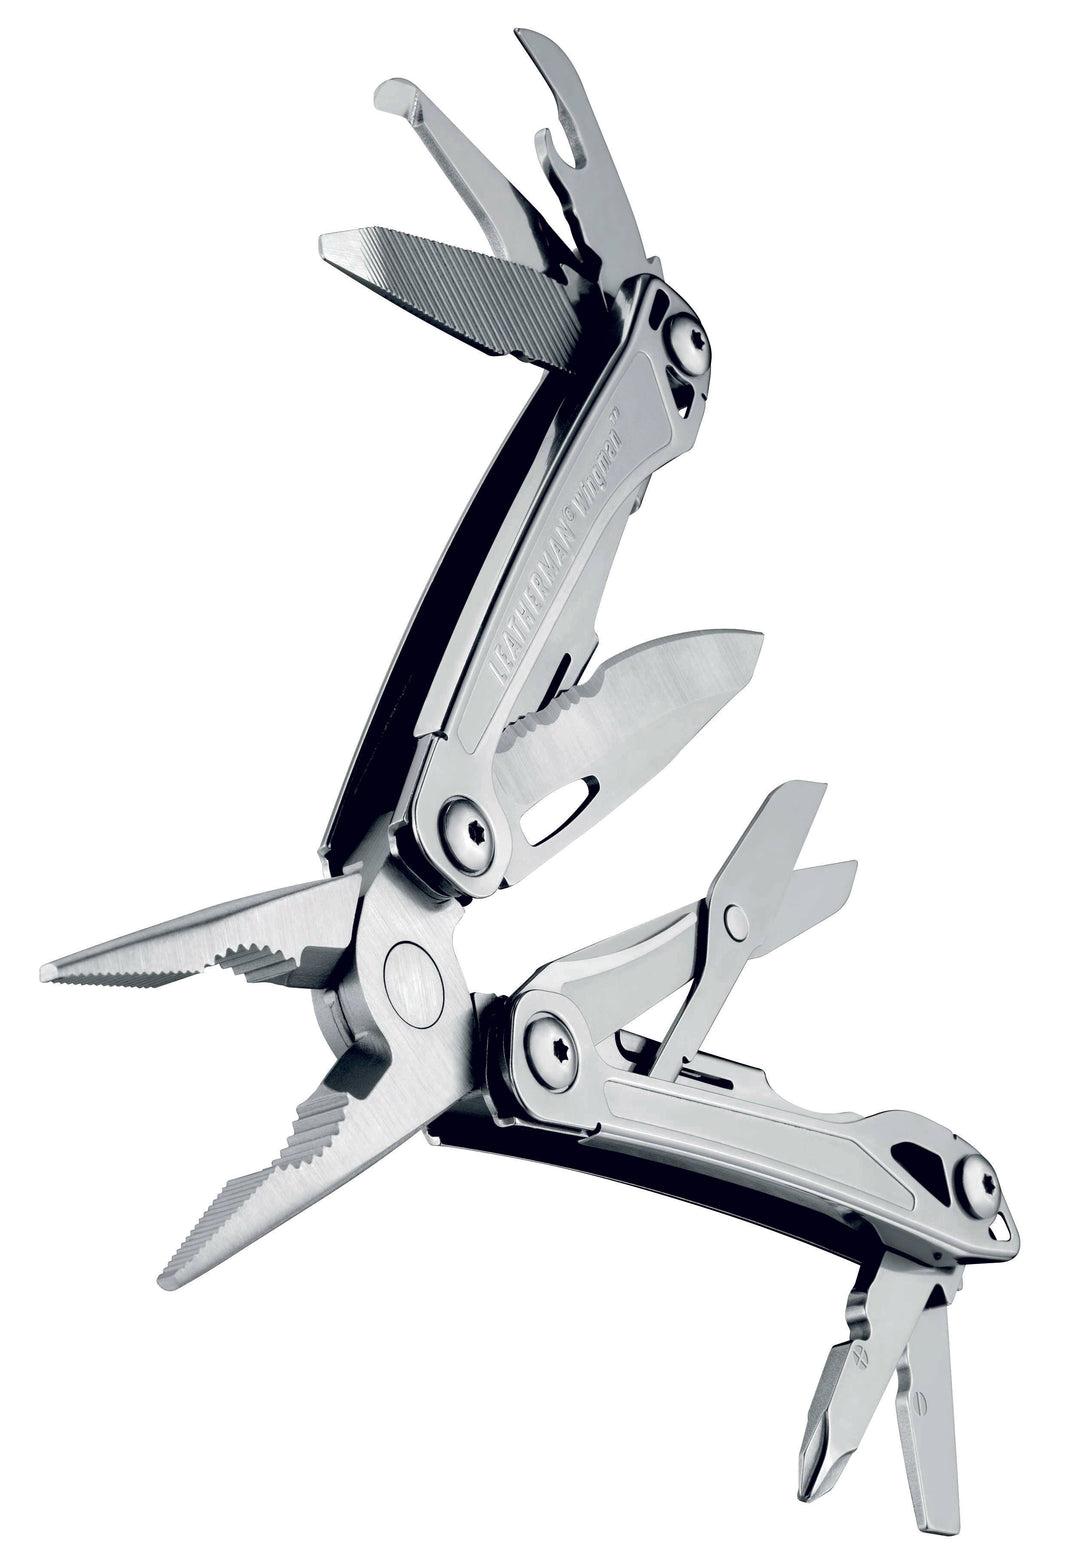 Wingman  Equipment Leatherman - The Back Alley Army Store